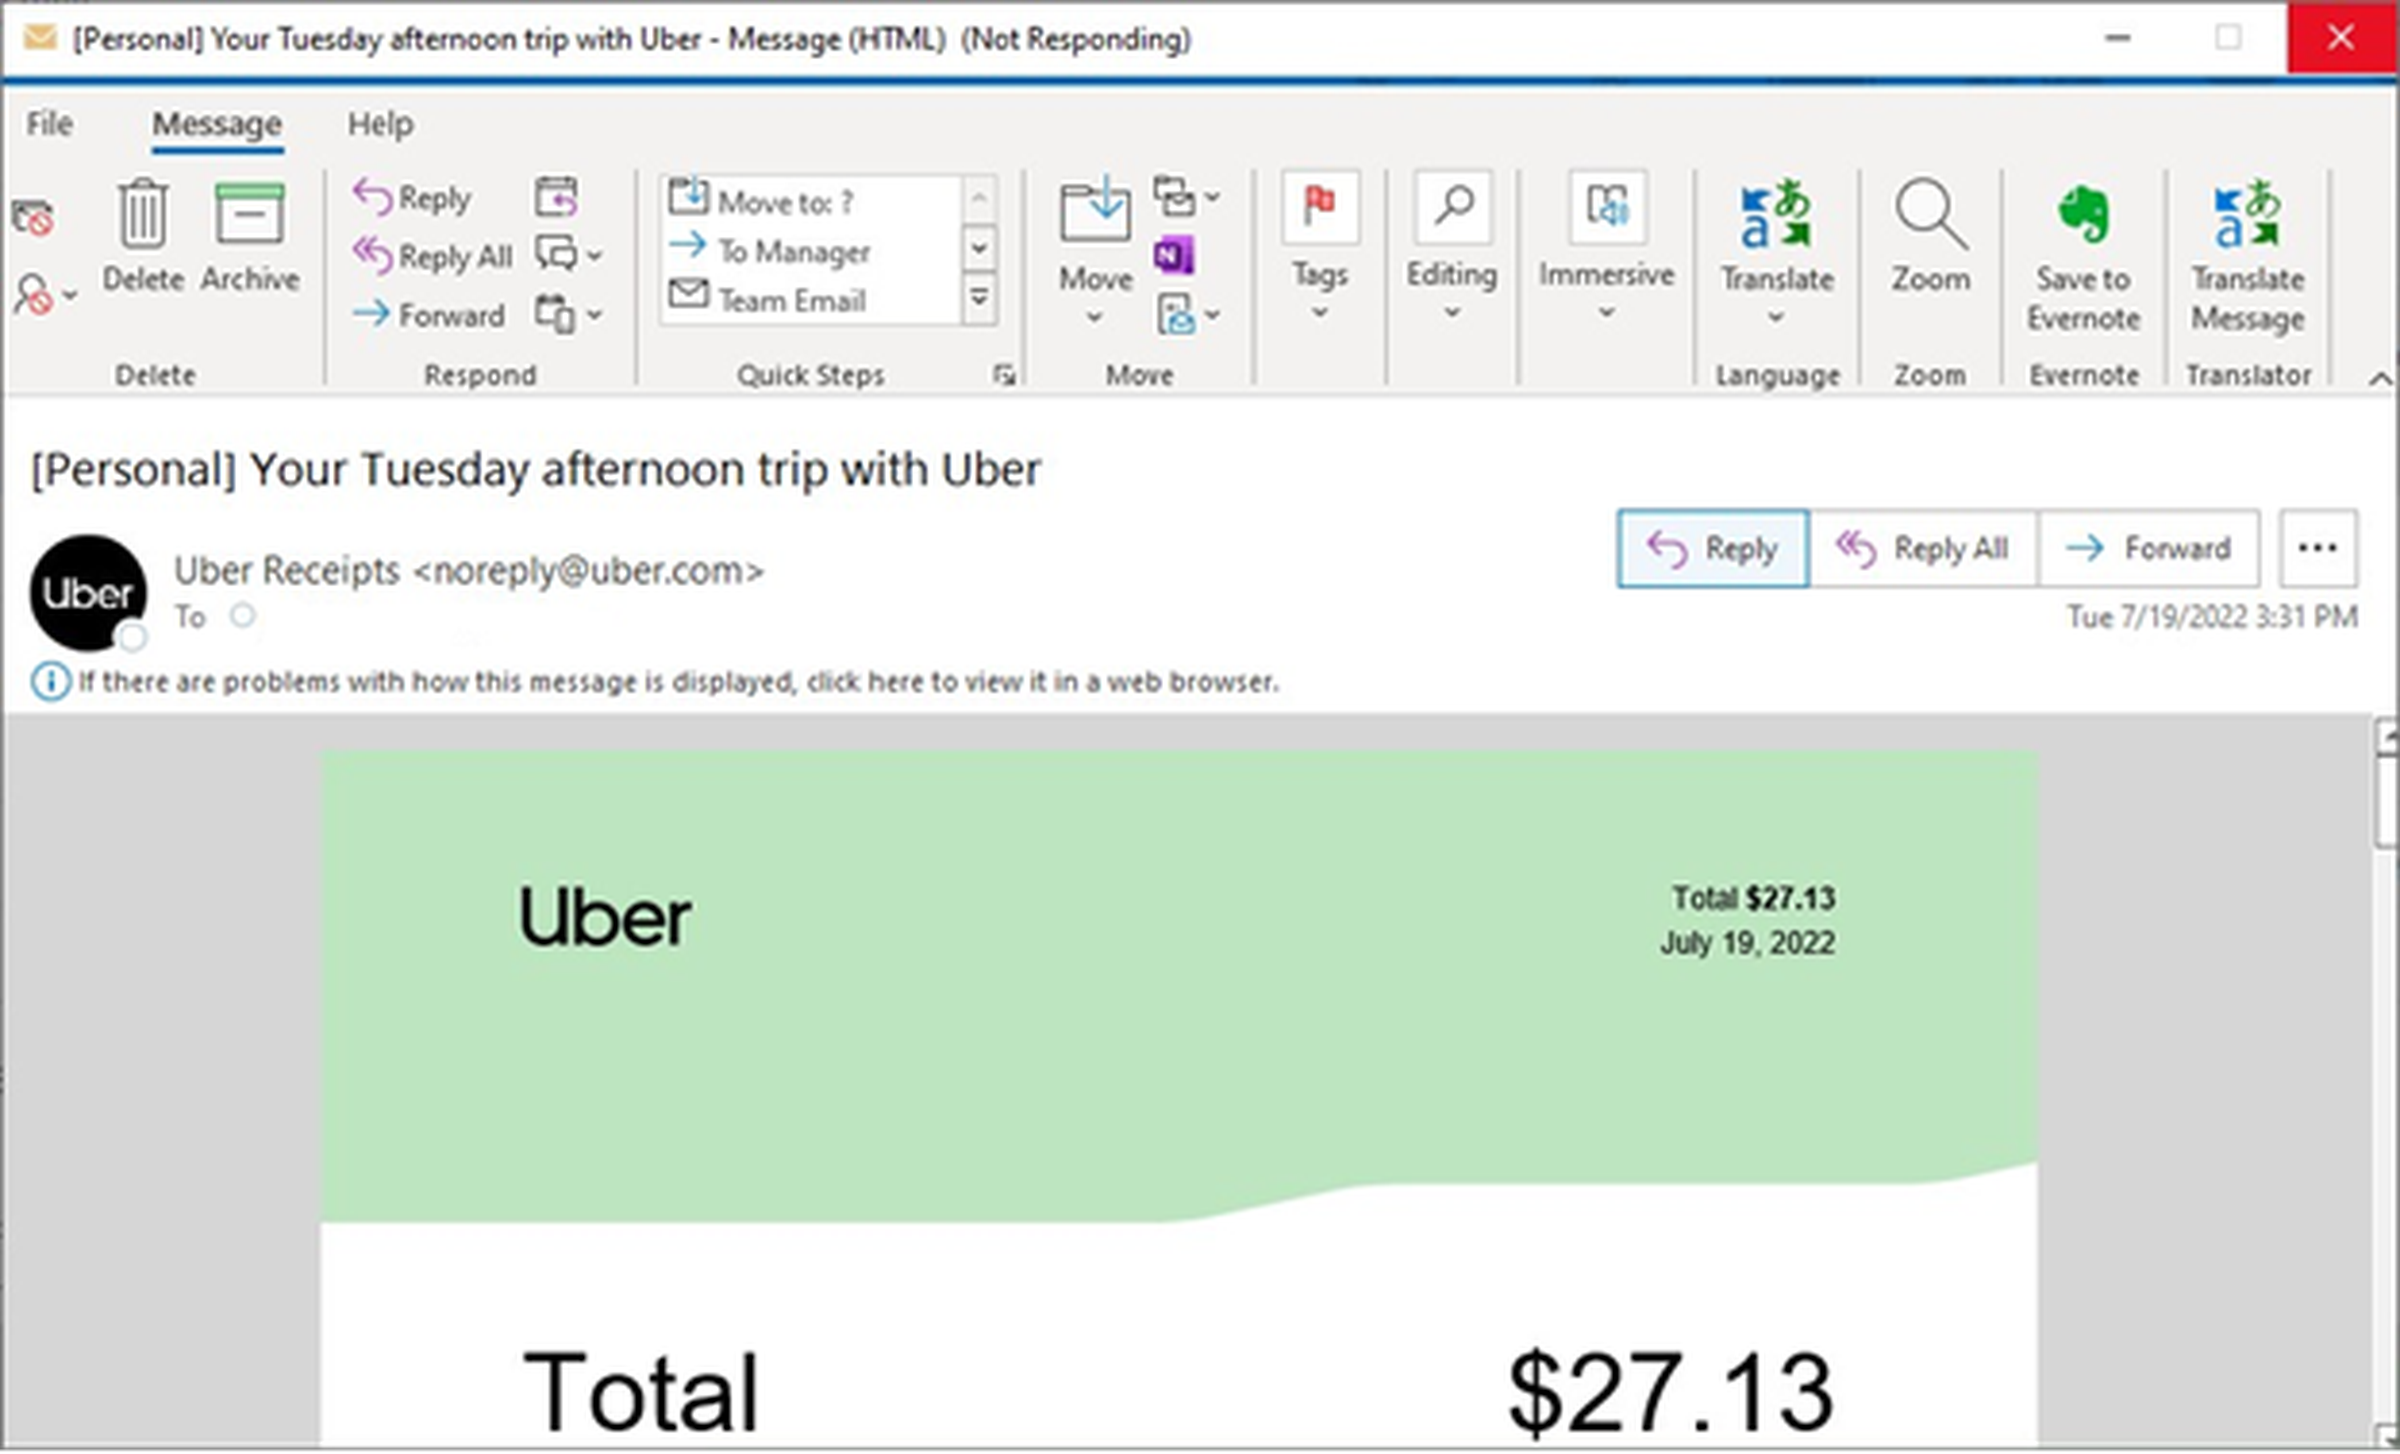 Outlook crashing on Windows when reviewing an Uber email receipt.